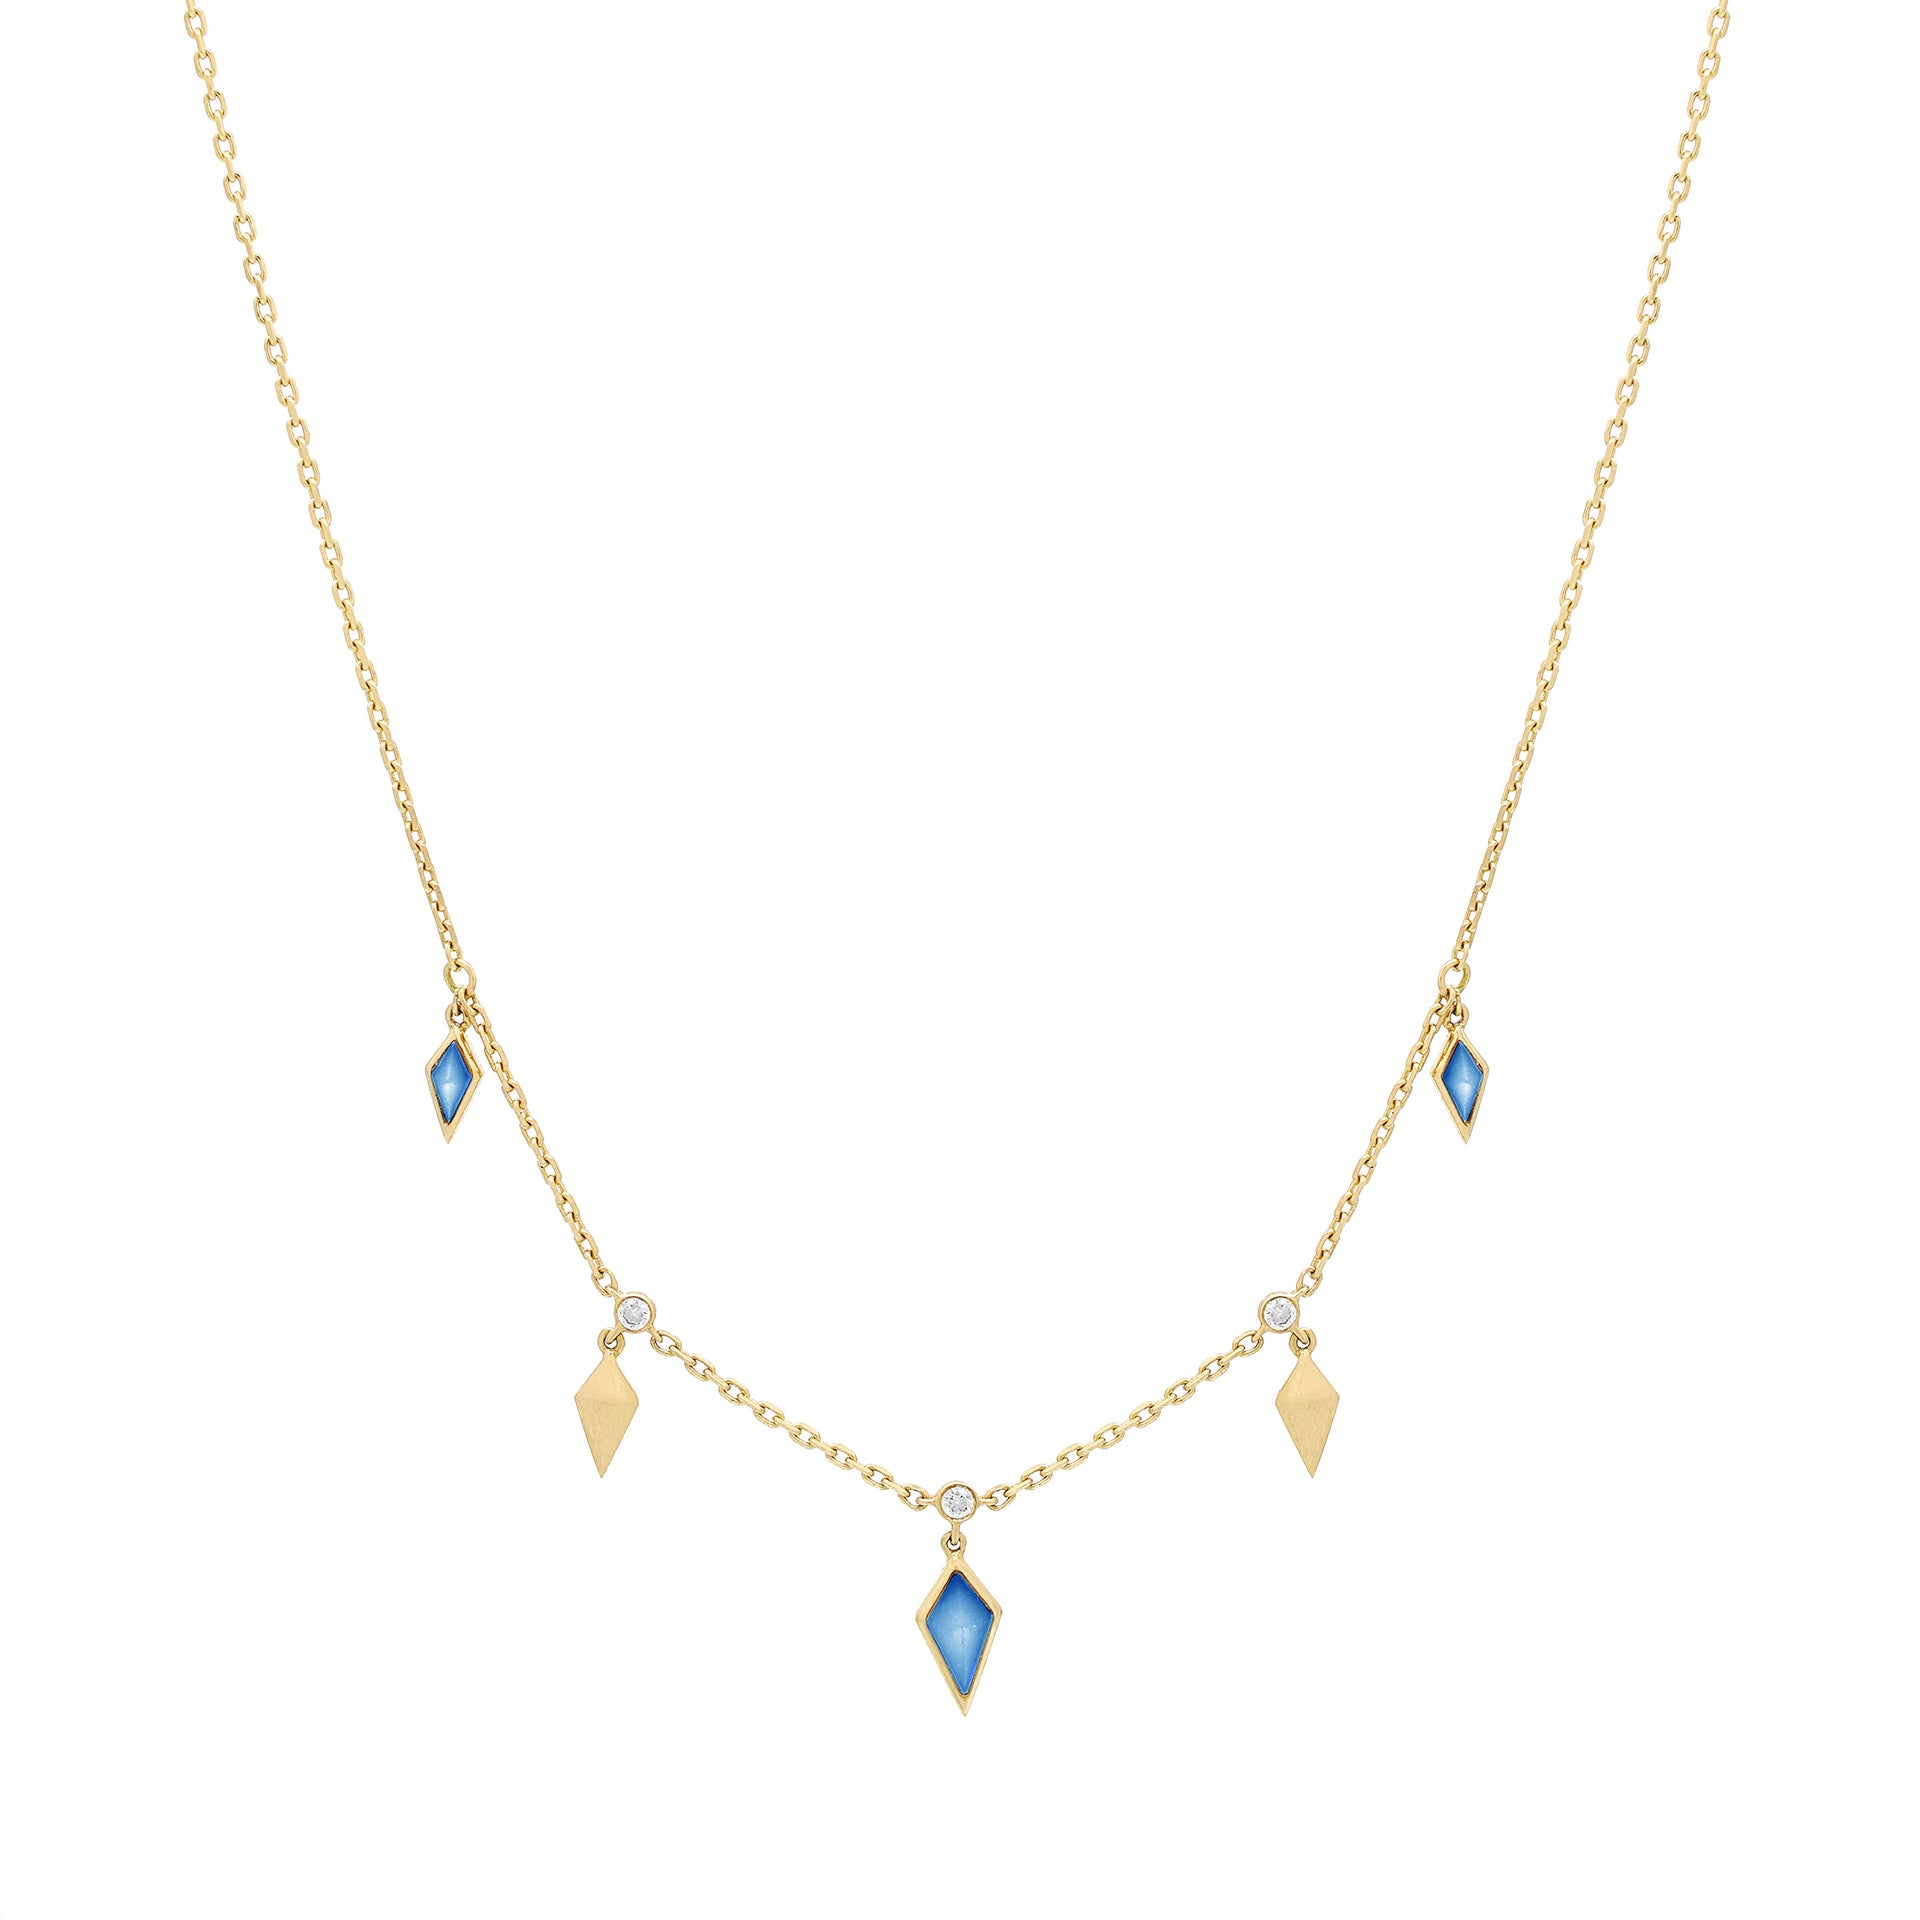 Al Merta’shah Necklace in Diamonds and Blue Agate